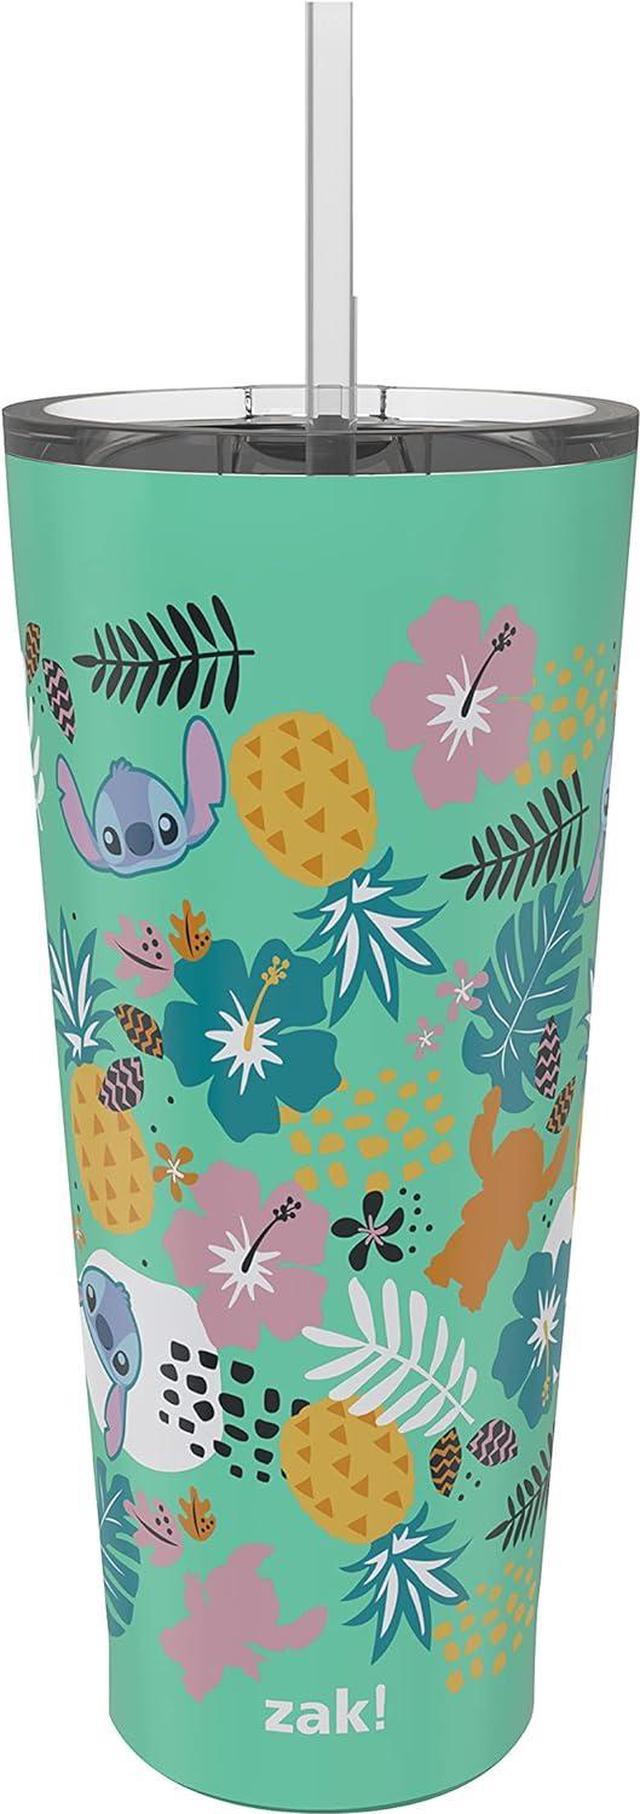 Zak Designs Disney Movie Vacuum Insulated Stainless Steel Travel Tumbler with Splash-proof Lid, Includes Reusable Plastic Straw and Fits in Car Cup HO